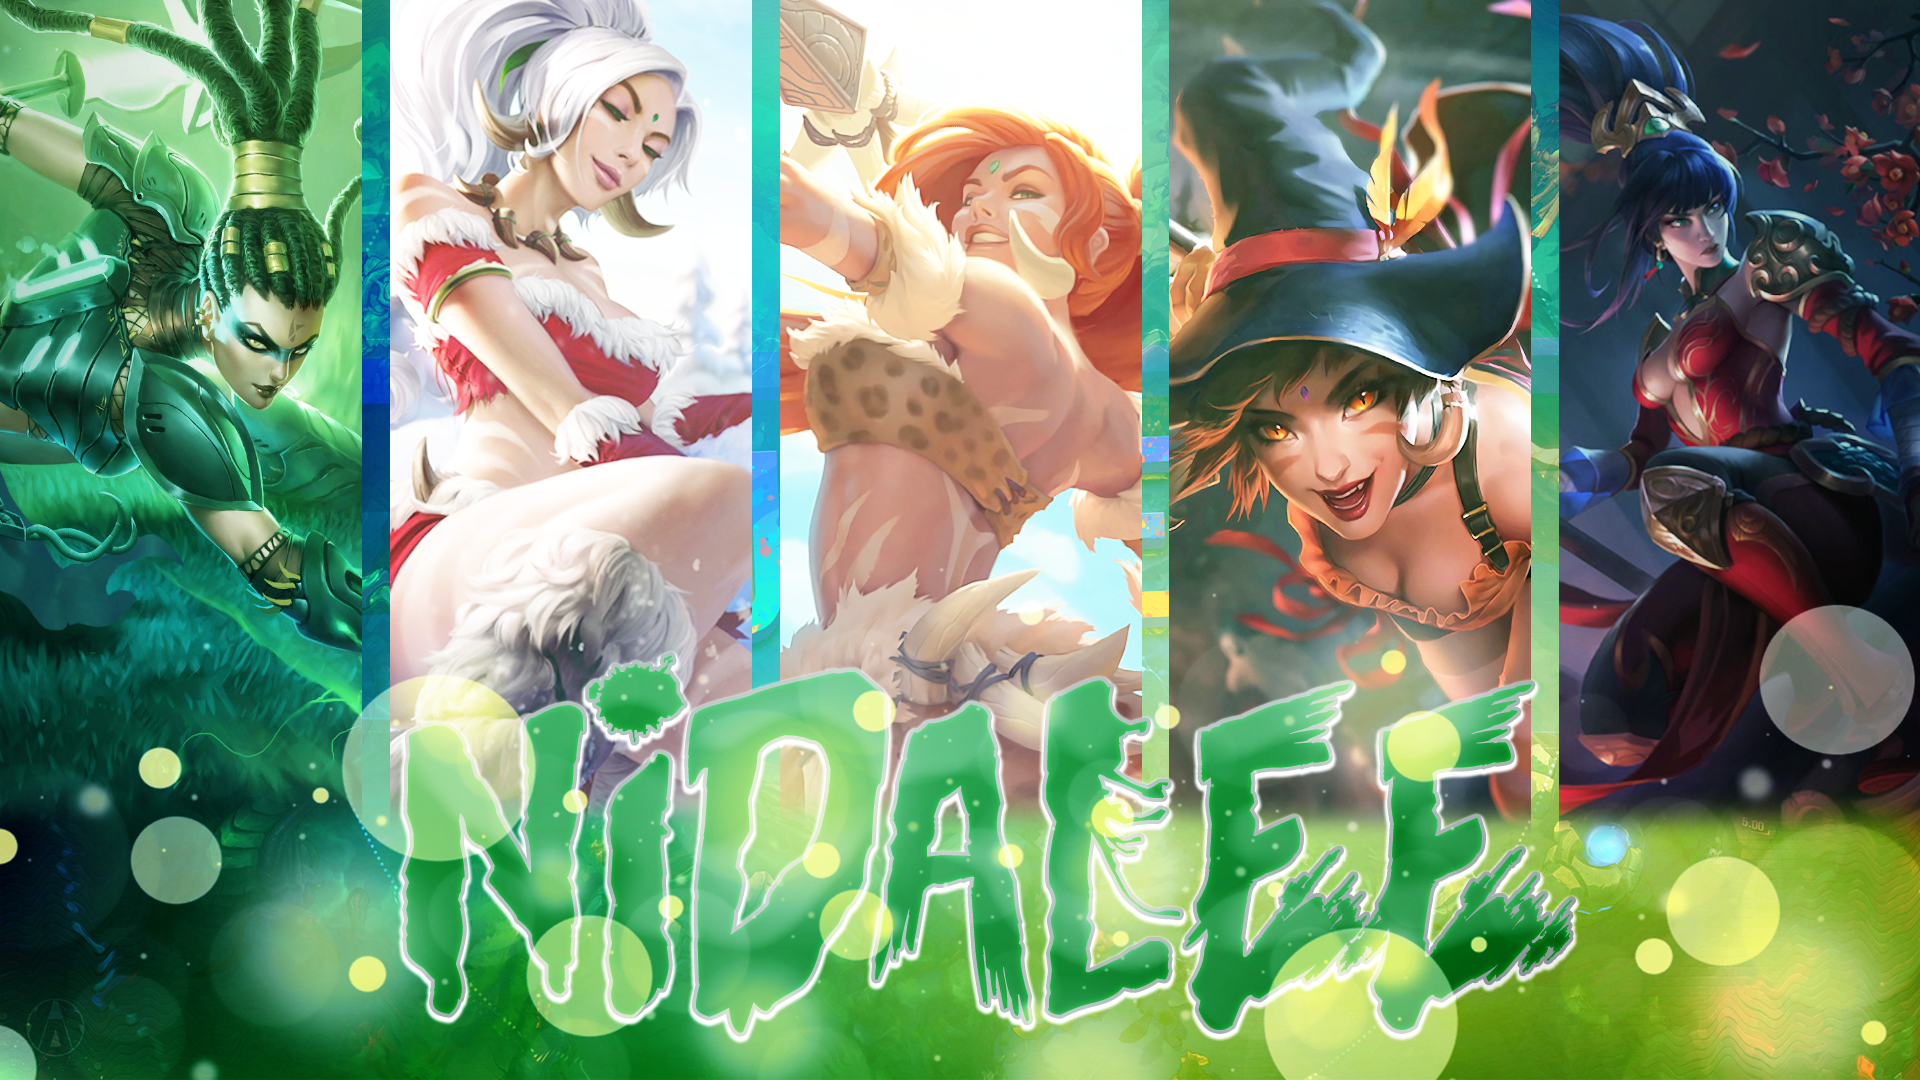 General 1920x1080 League of Legends Nidalee (League of Legends) collage anime girls witch hat PC gaming